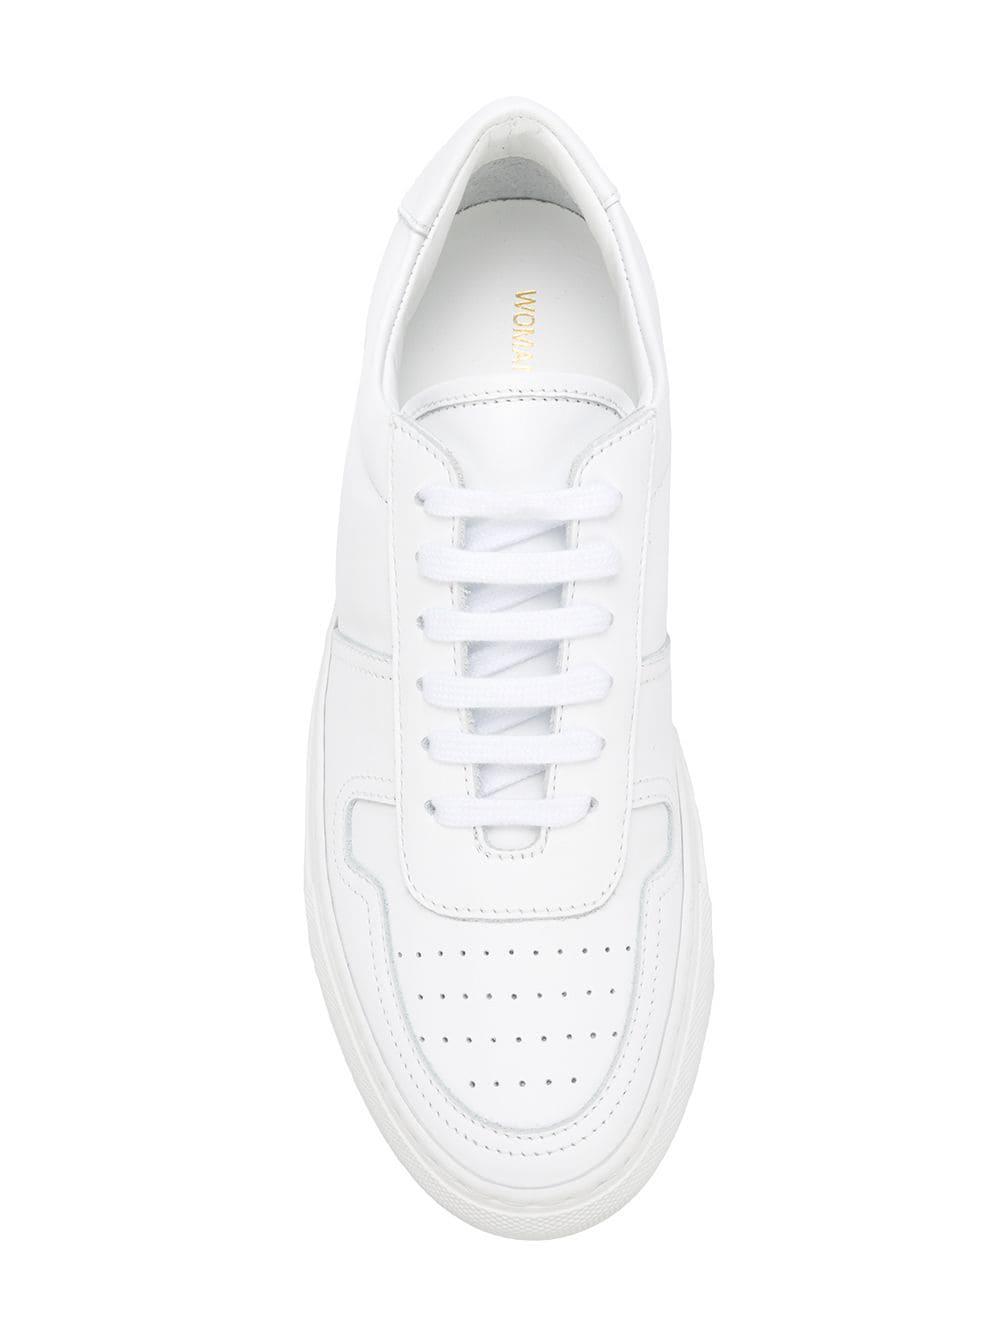 Common Projects Leather Bball Low Sneakers in White - Lyst